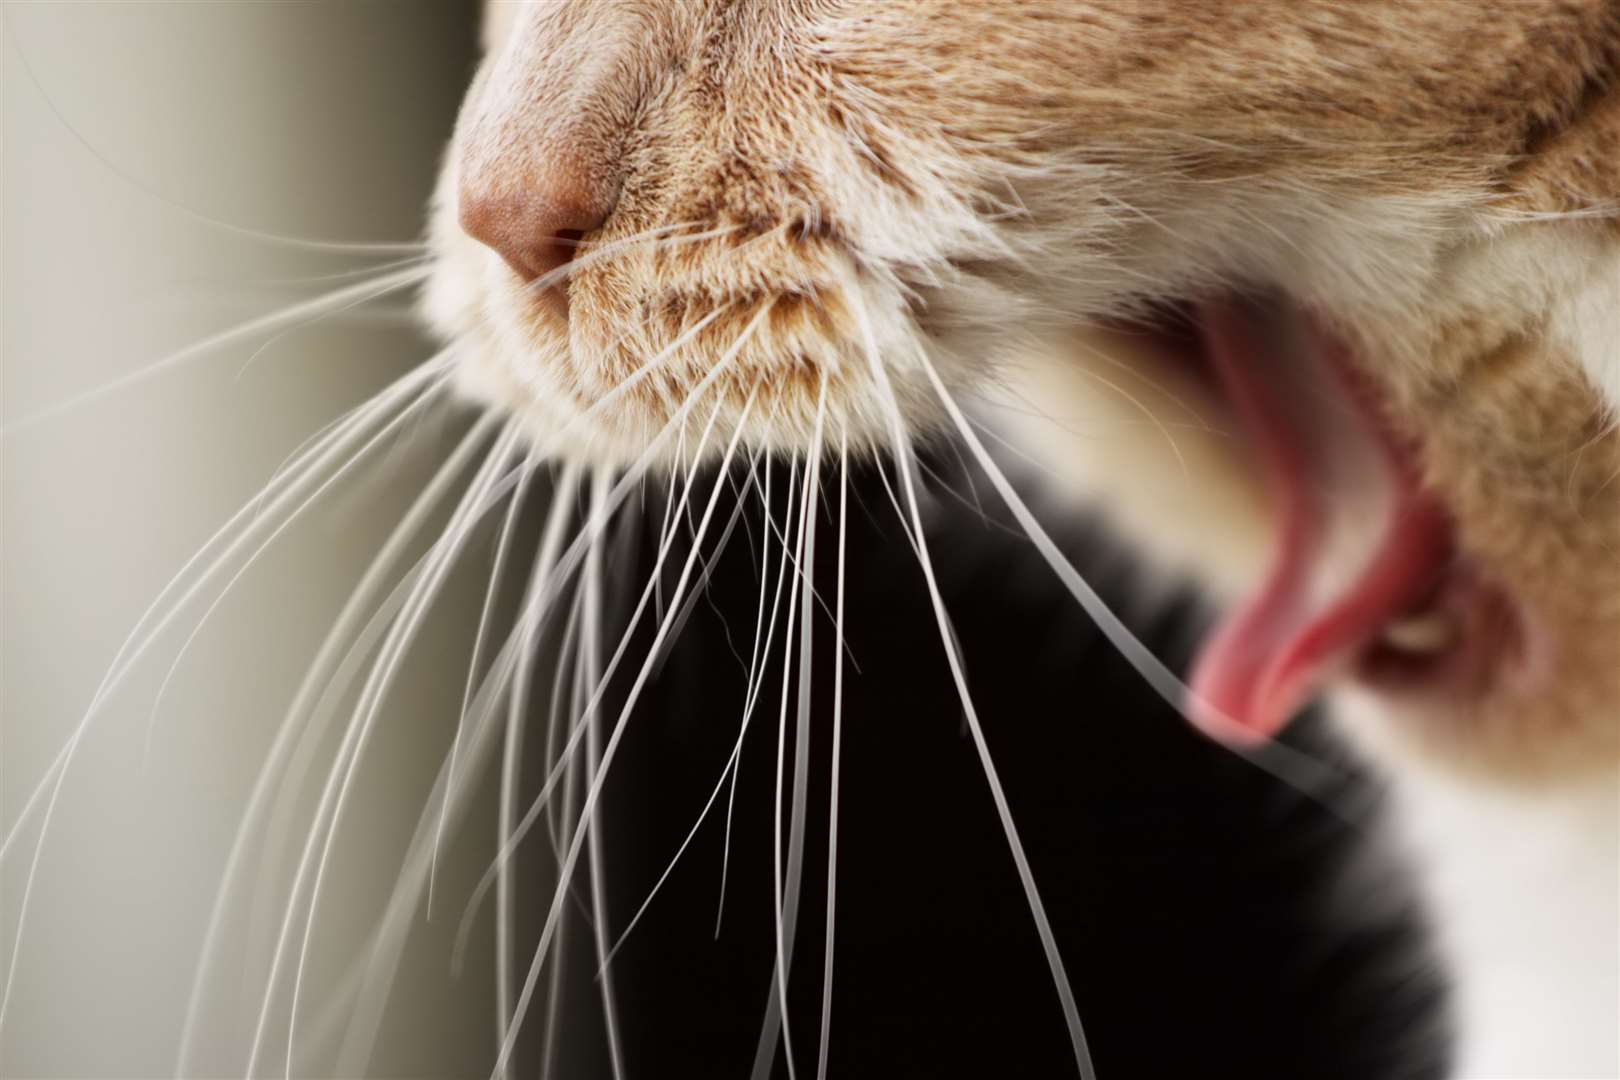 Cat’s teeth are not clean and can be covered in thousands of bacteria, so if they bite each other it is very likely an infection will quickly develop.